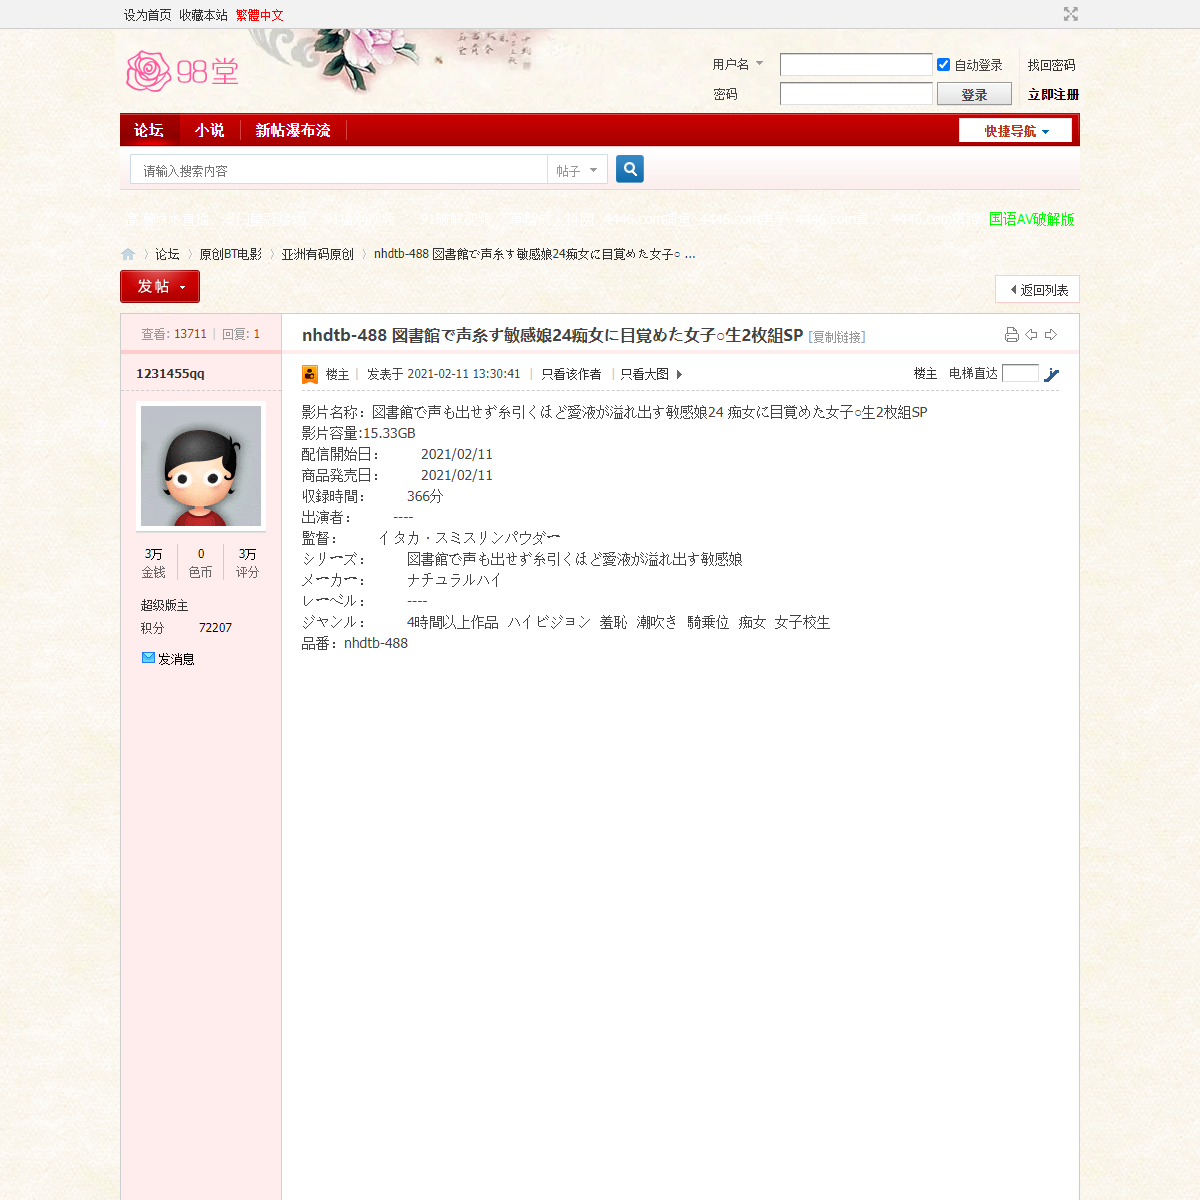 A complete backup of https://sehuatang.net/thread-478982-1-1.html